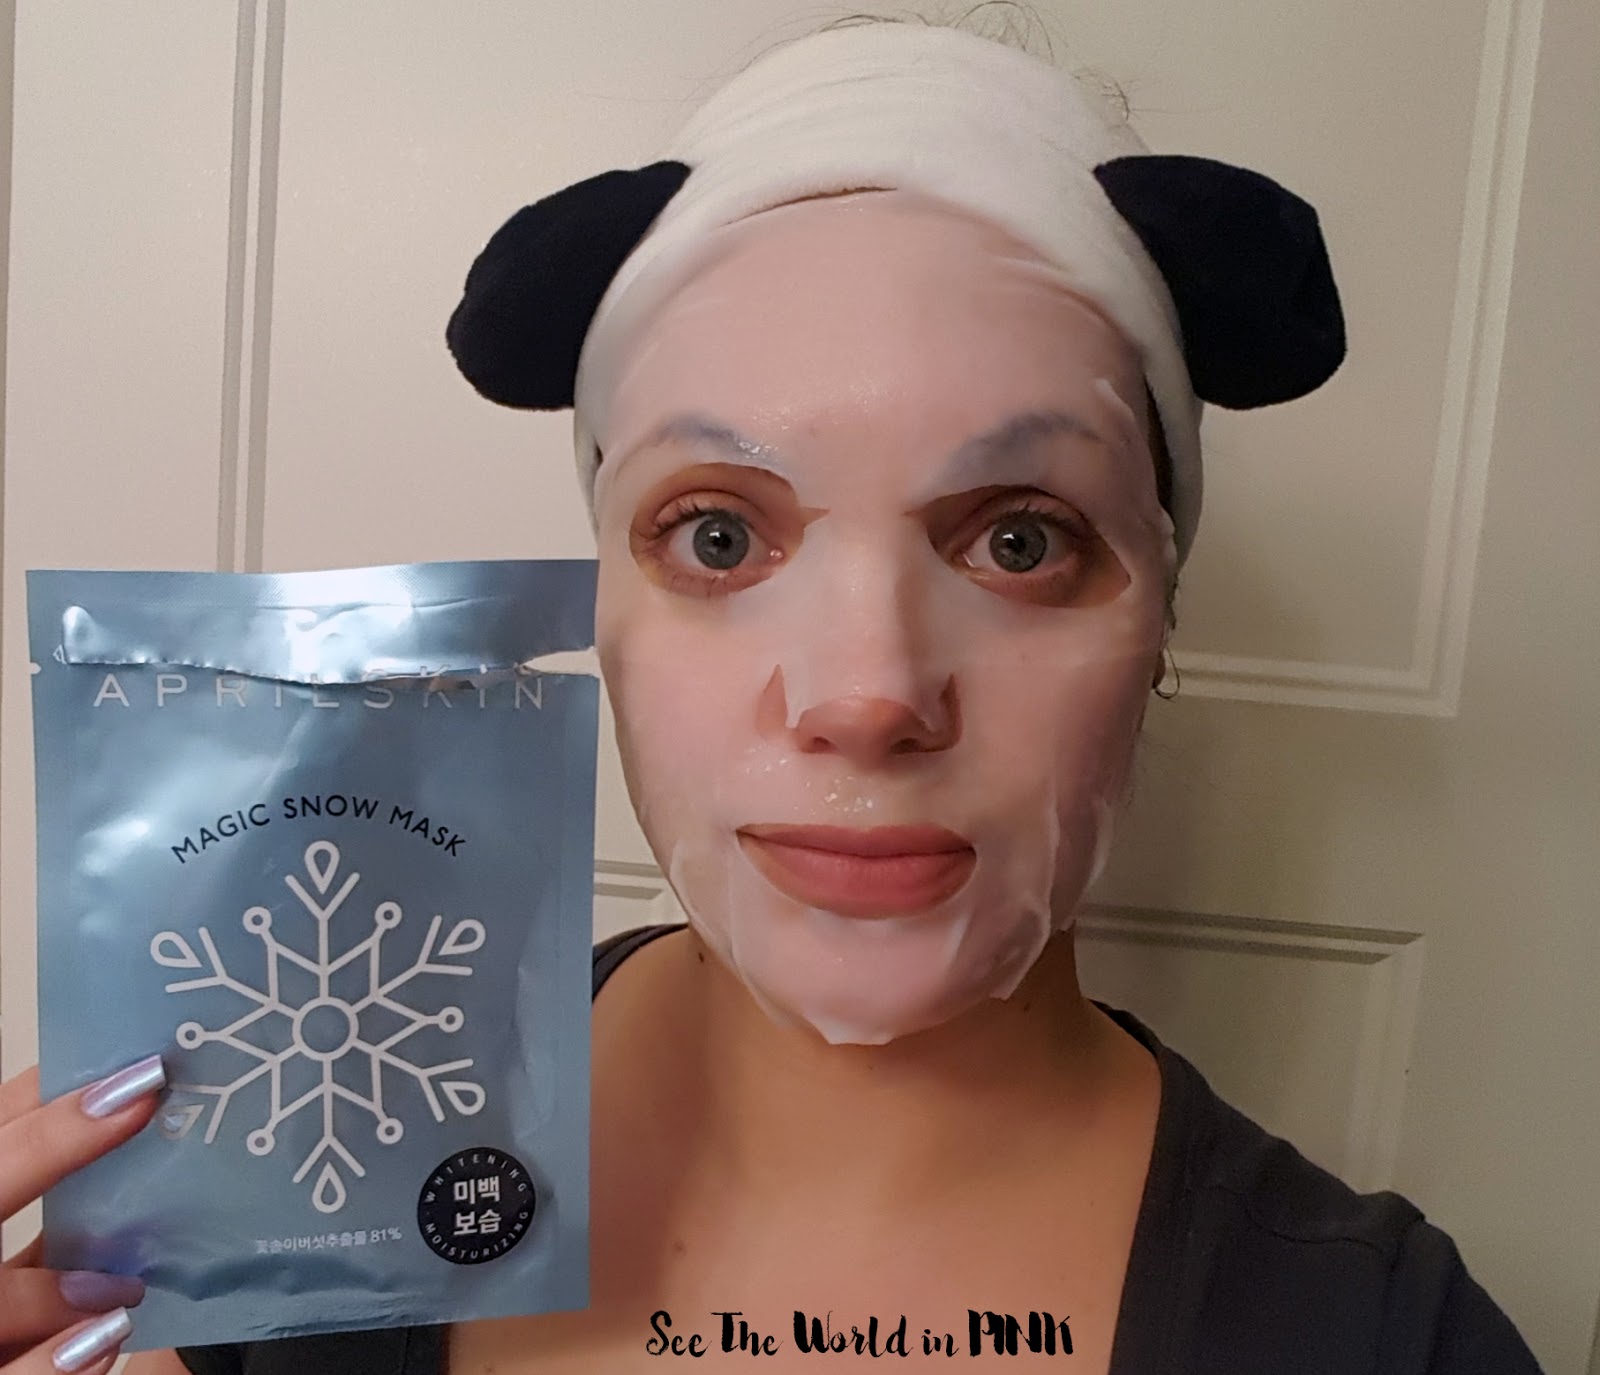 Mask Wednesday - Aprilskin Magic Snow Mask Try-on and Review! 